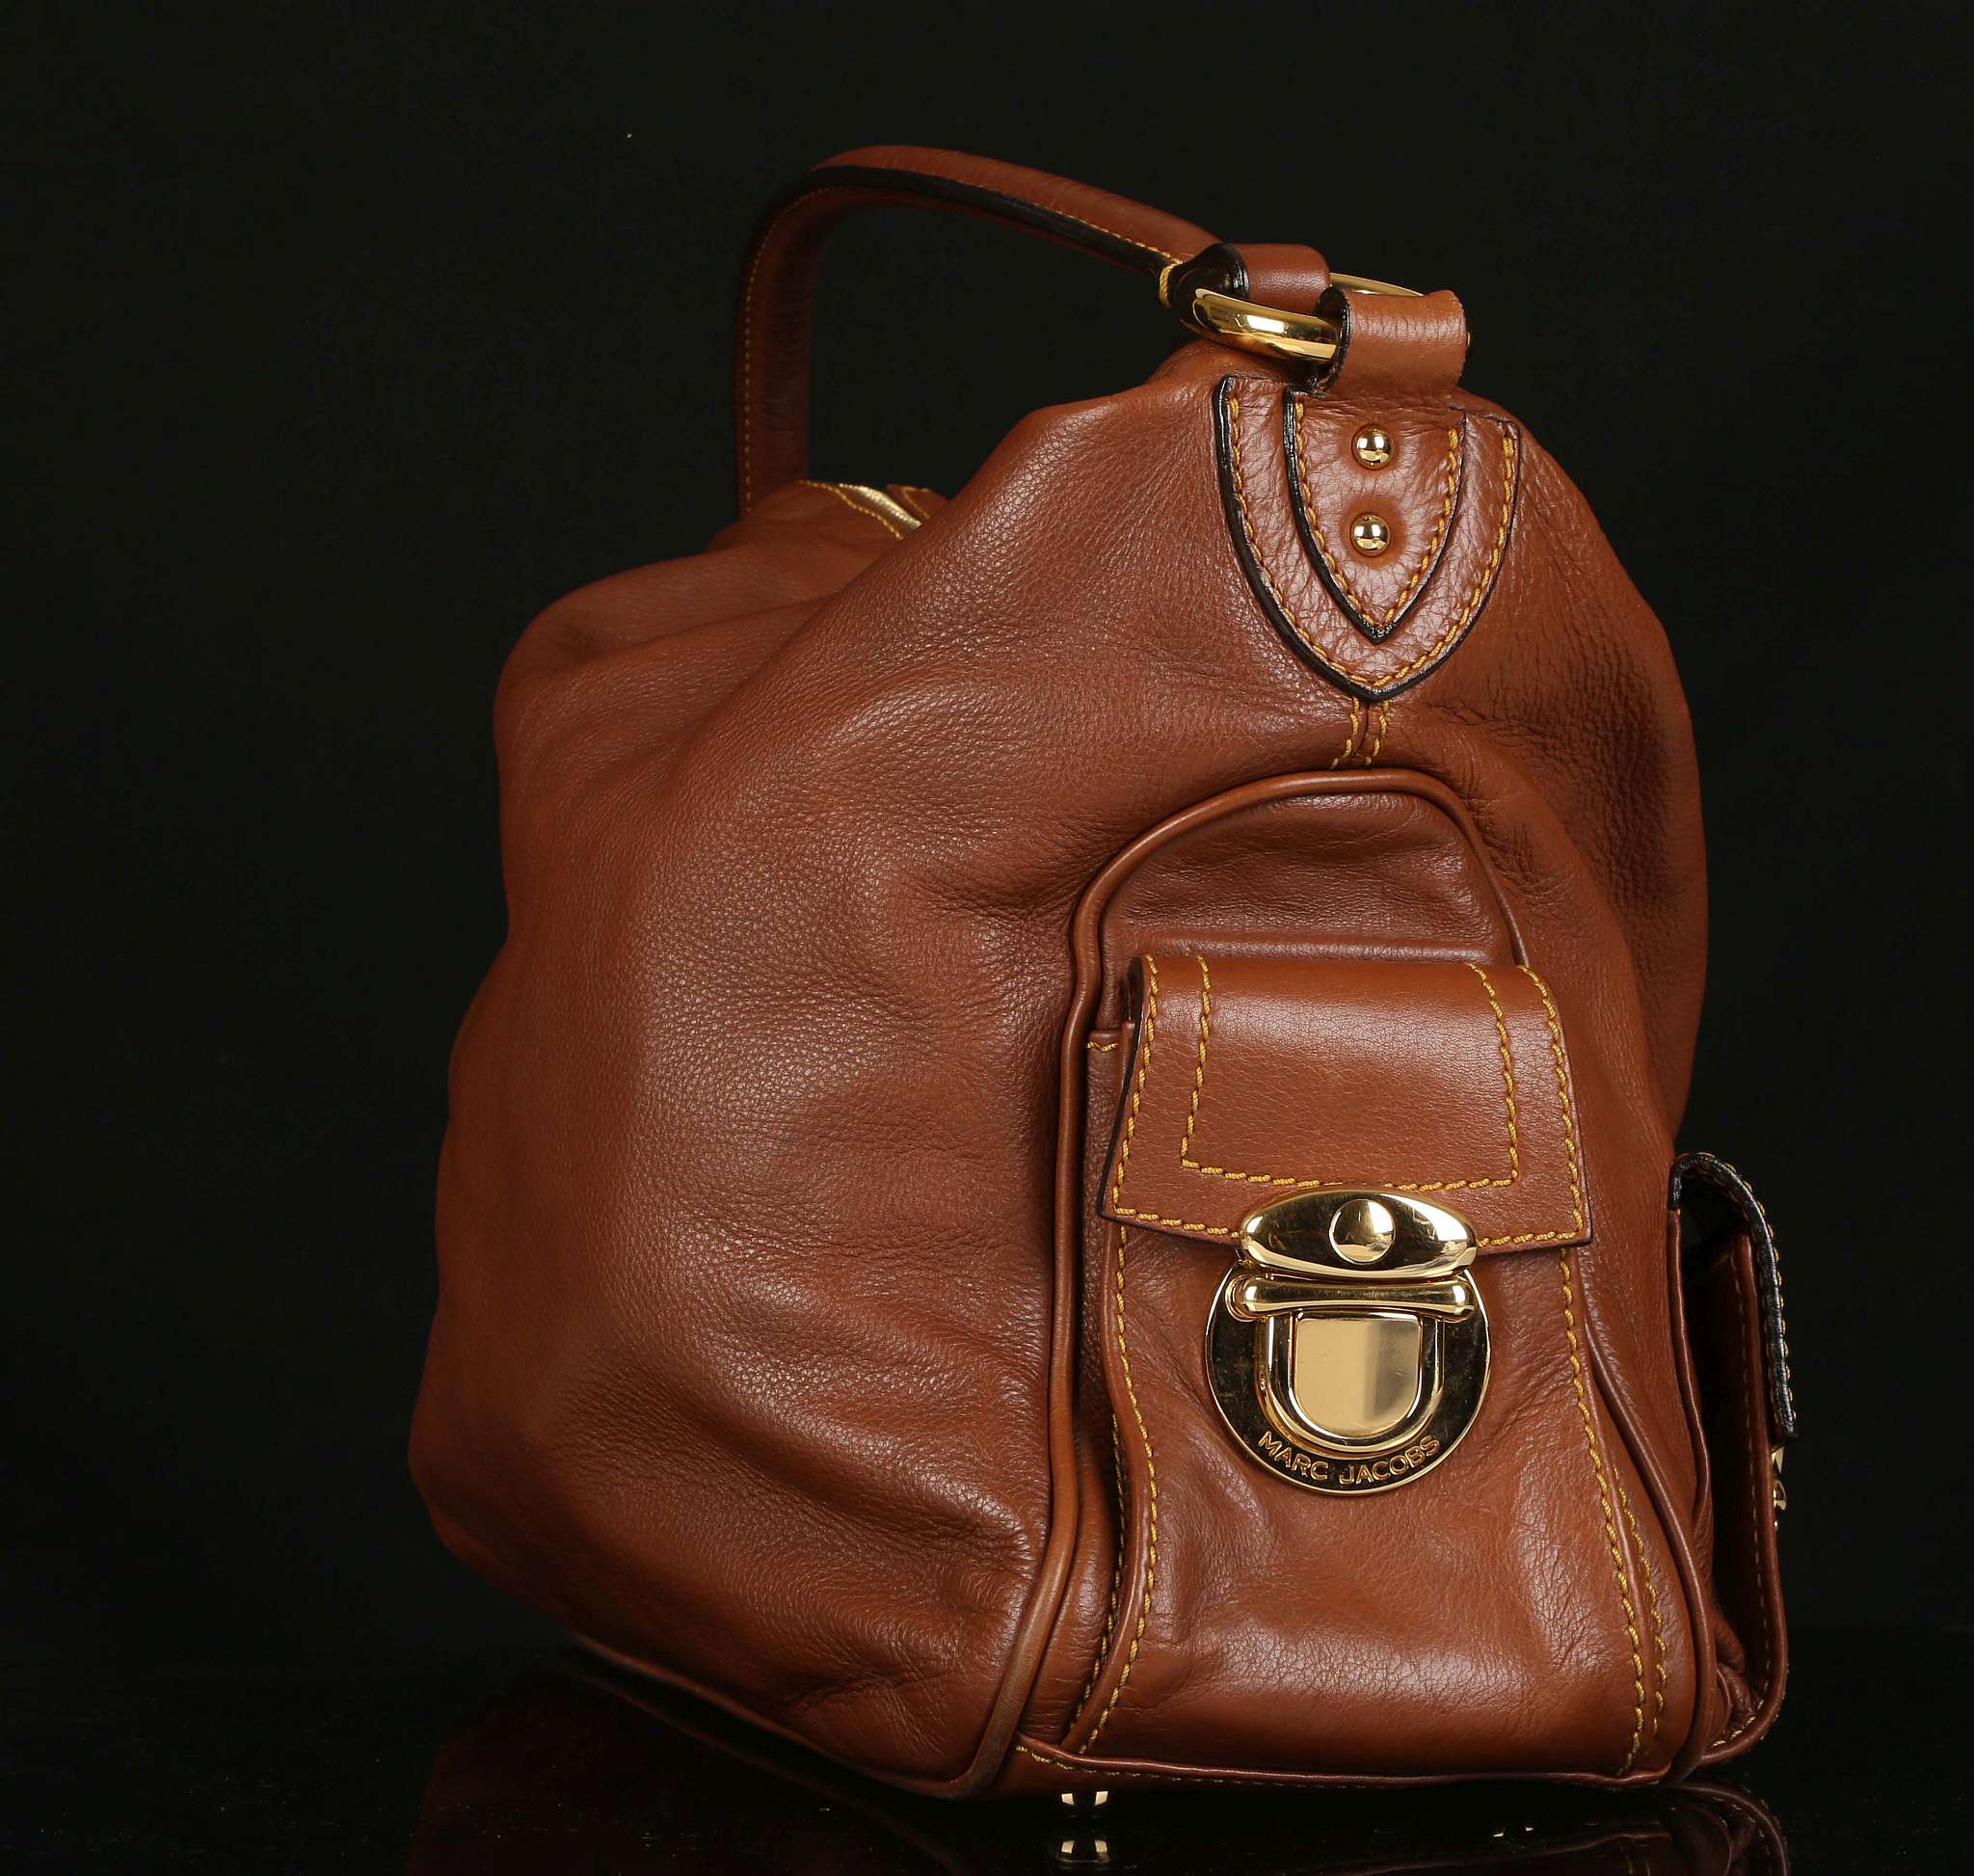 MARC JACOBS BLAKE HOBO BAG, soft brown leather with contrasting stitching, gilt tone hardware, - Image 3 of 6